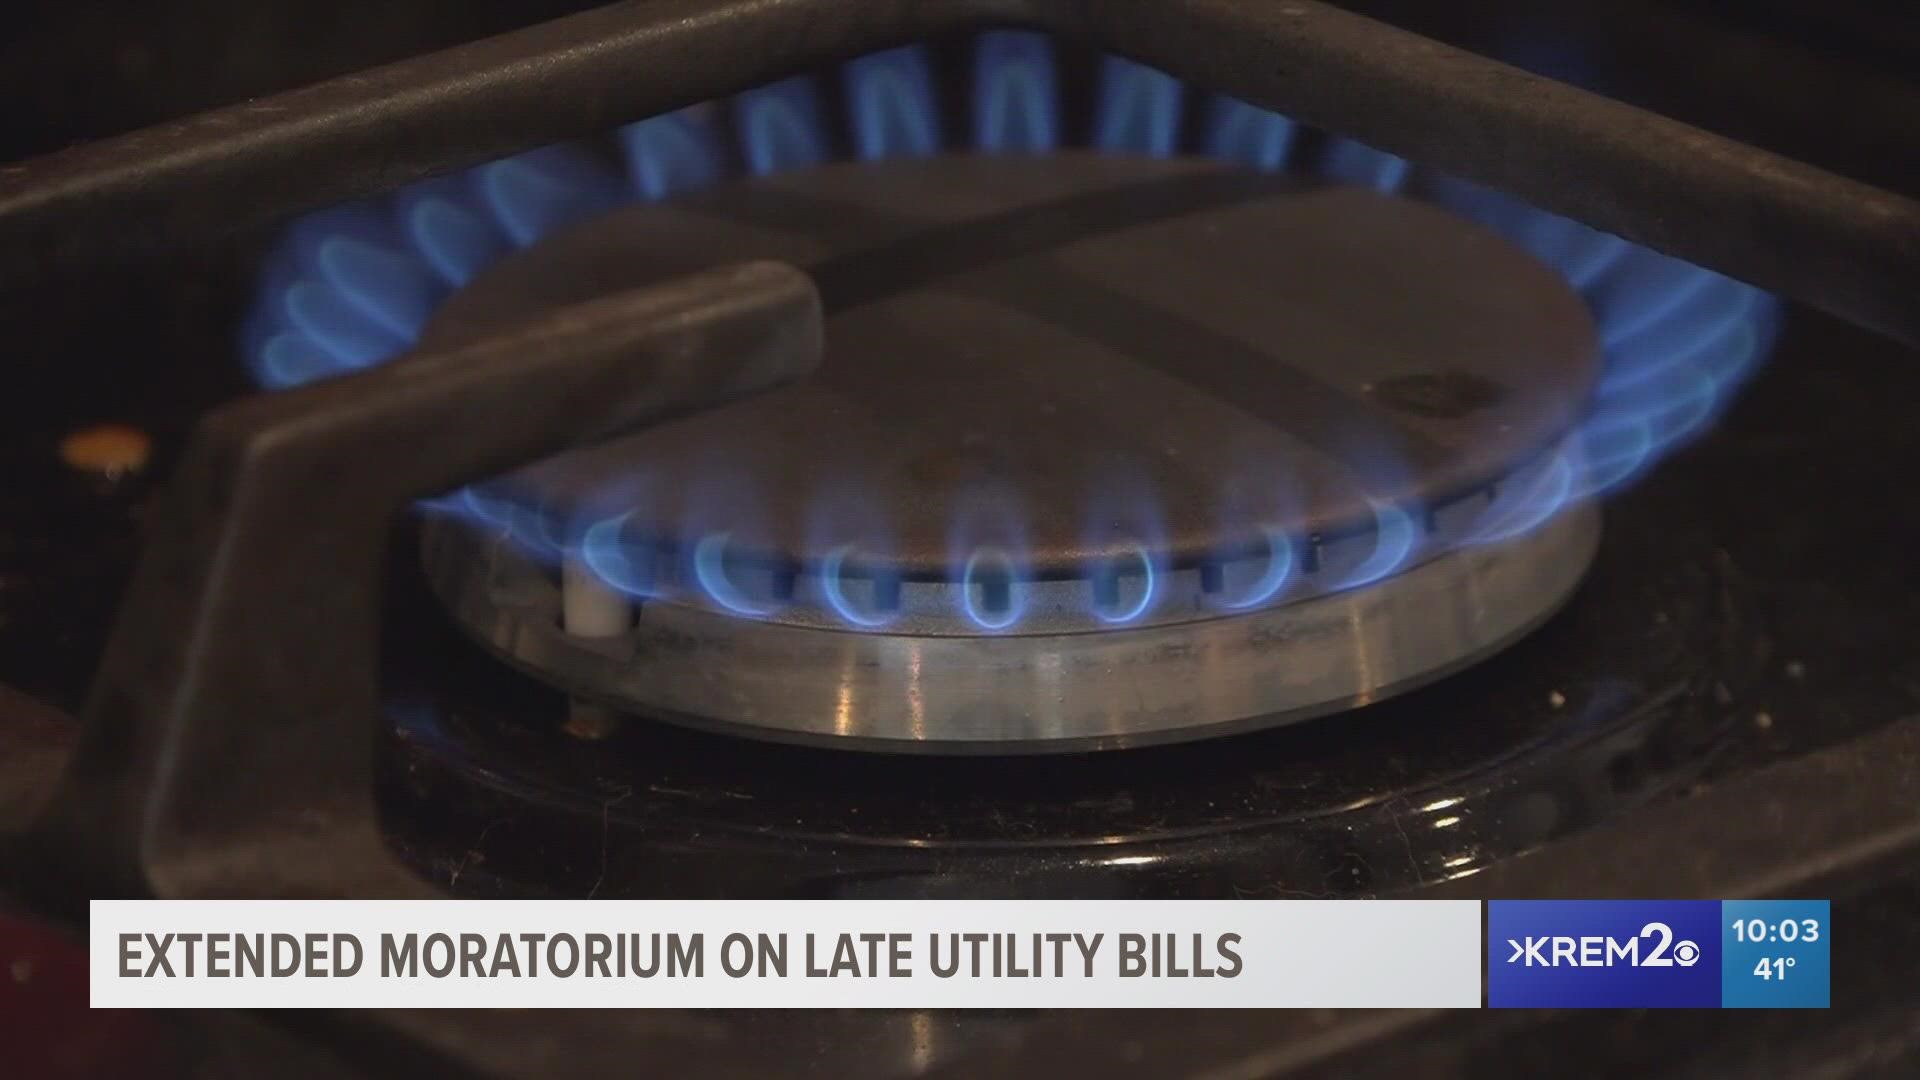 The move comes after the statewide moratorium on utility shutoffs due to past due bills expired on September 30.